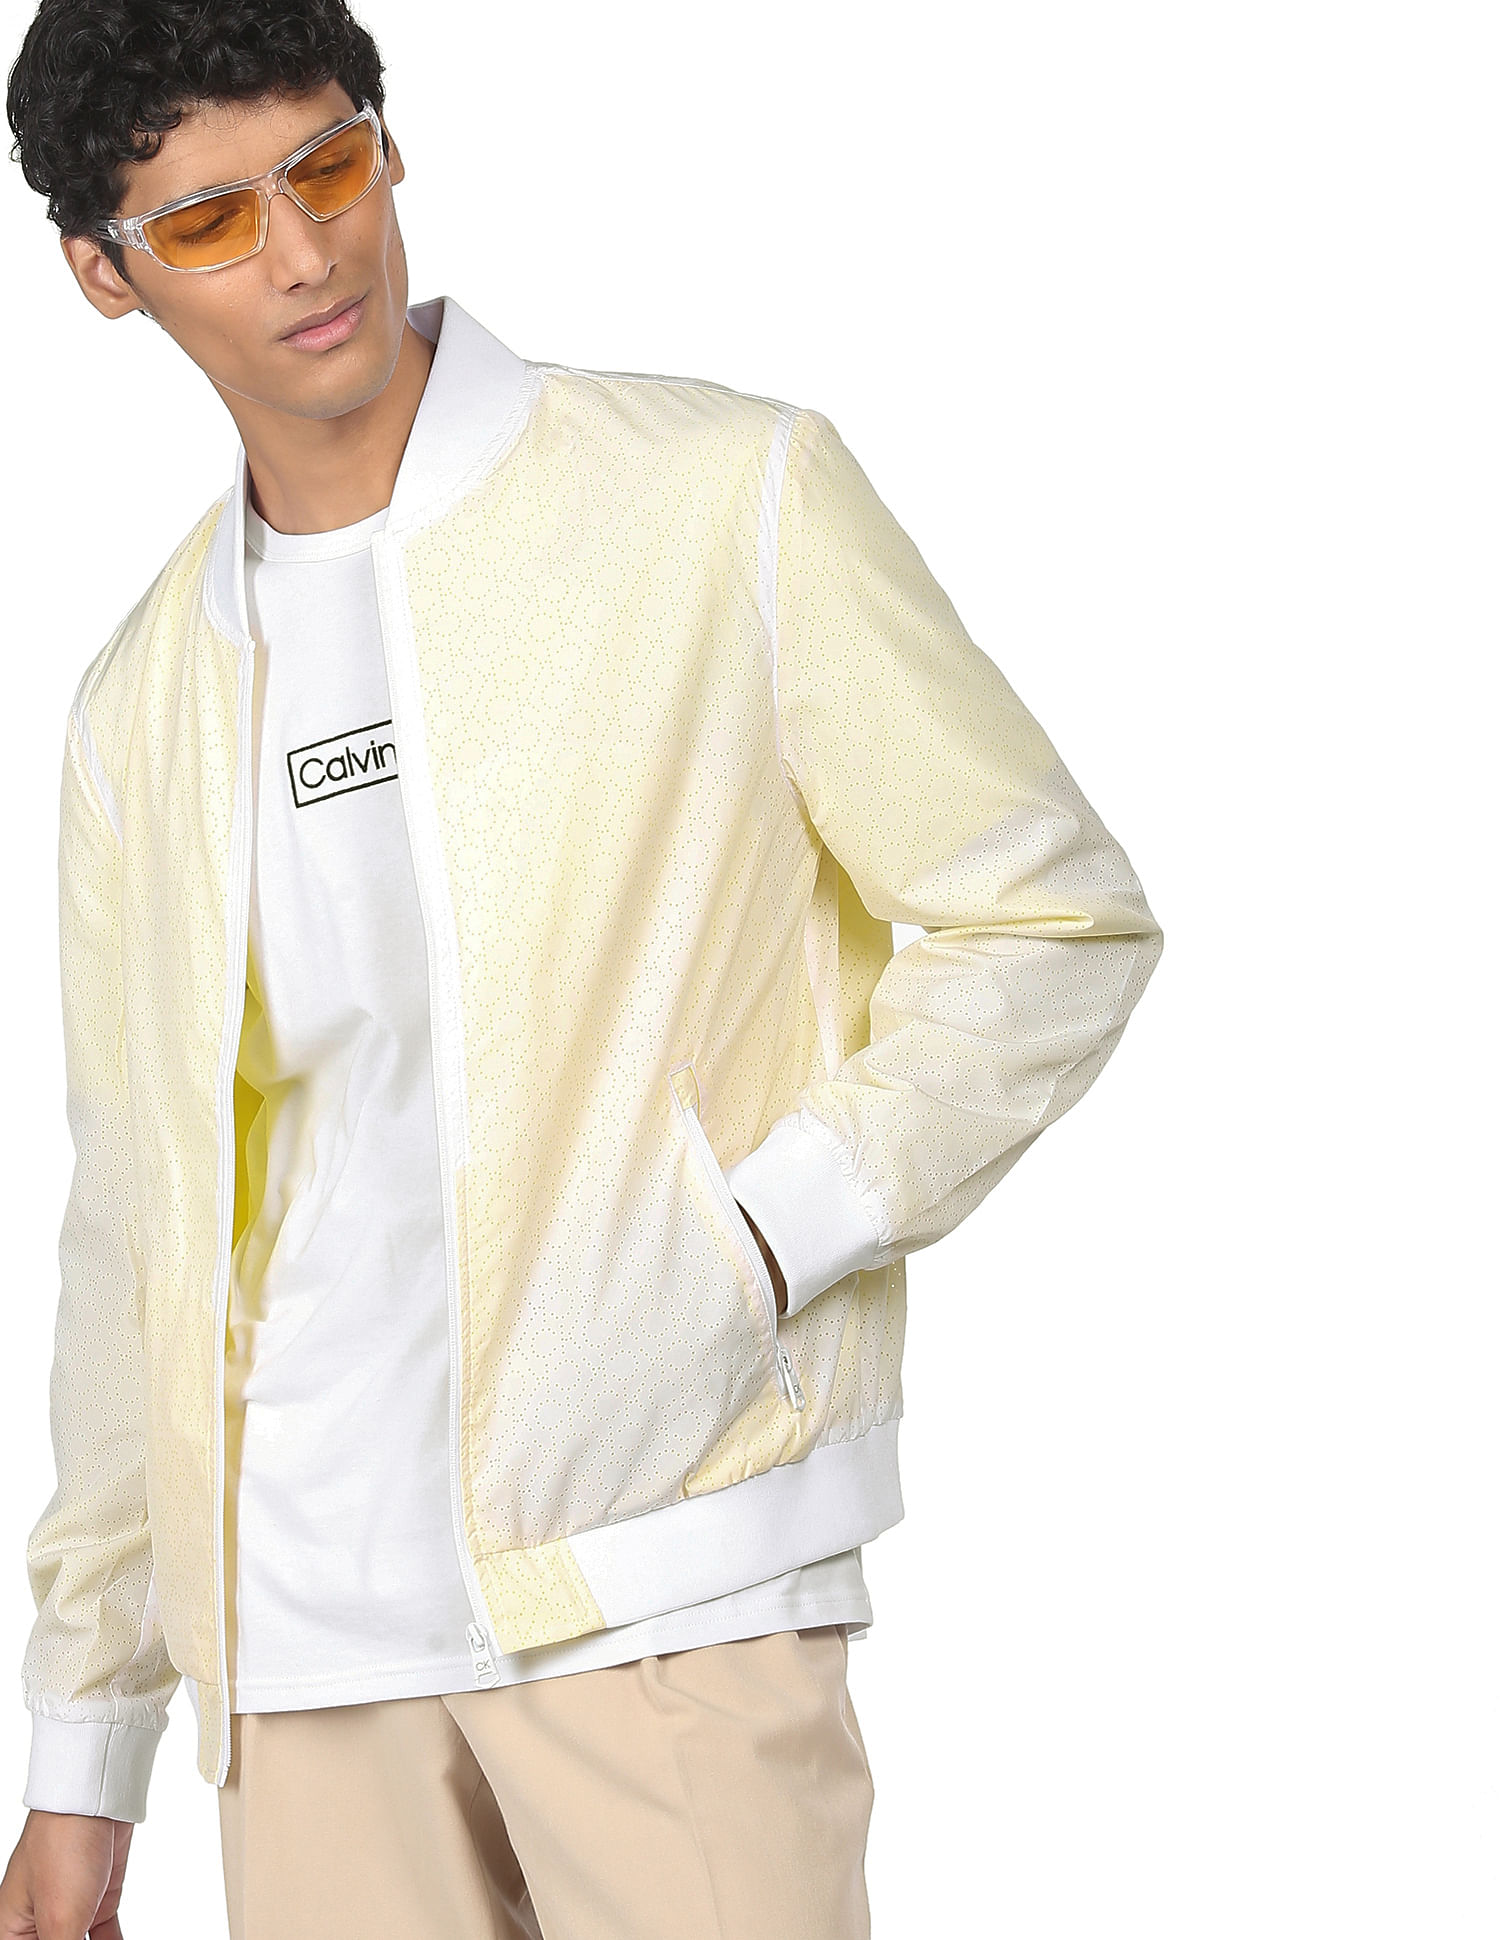 Buy Calvin Klein Men White And Yellow Polyester Perforated Bomber Jacket -  